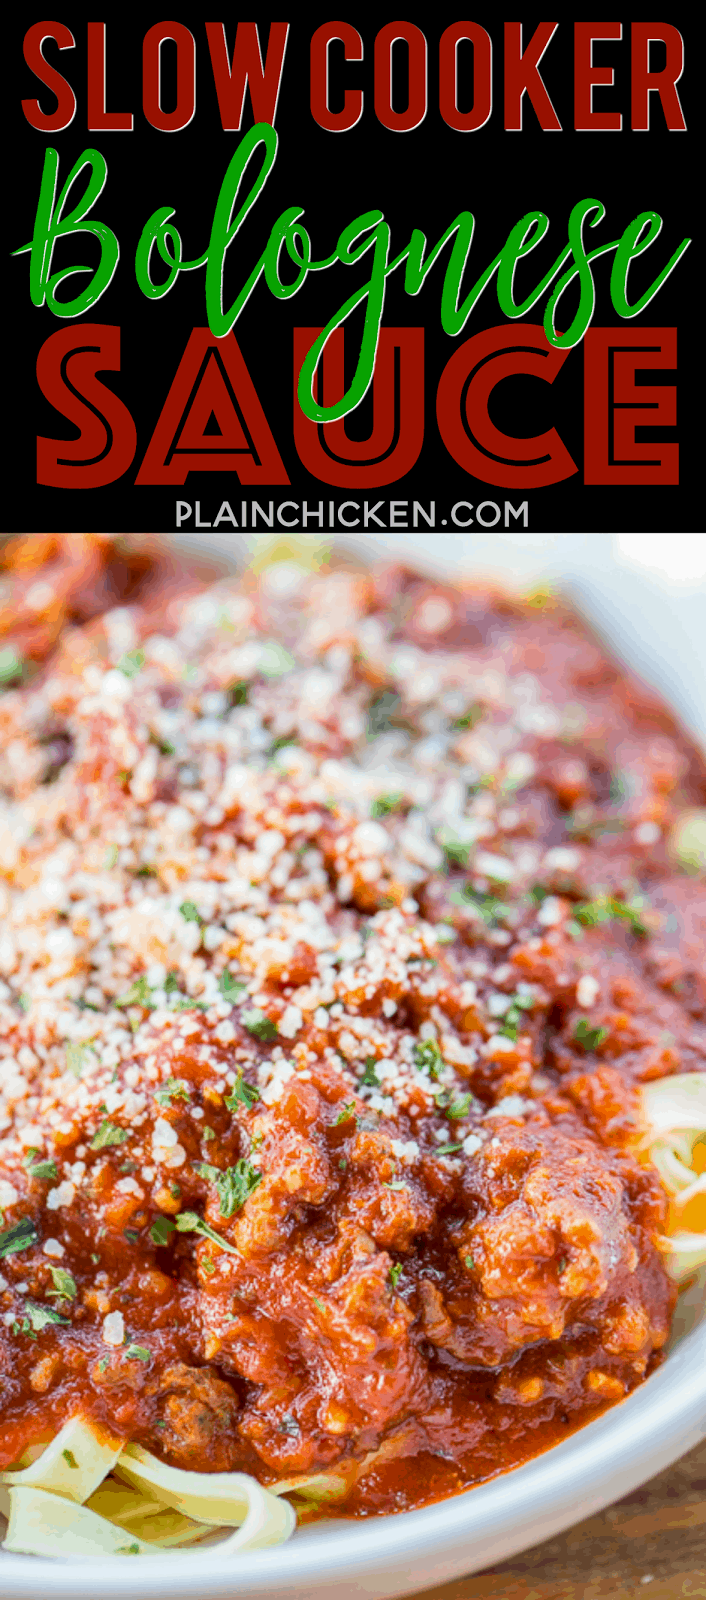 THE BEST Slow Cooker Bolognese Sauce - Italian sausage, garlic crushed tomatoes, tomato paste, and spices cook all day in the crock-pot. Hands-down THE BEST spaghetti sauce EVER! Everyone raves about this sauce. We make this all the time. Freeze leftovers for a quick meal later!